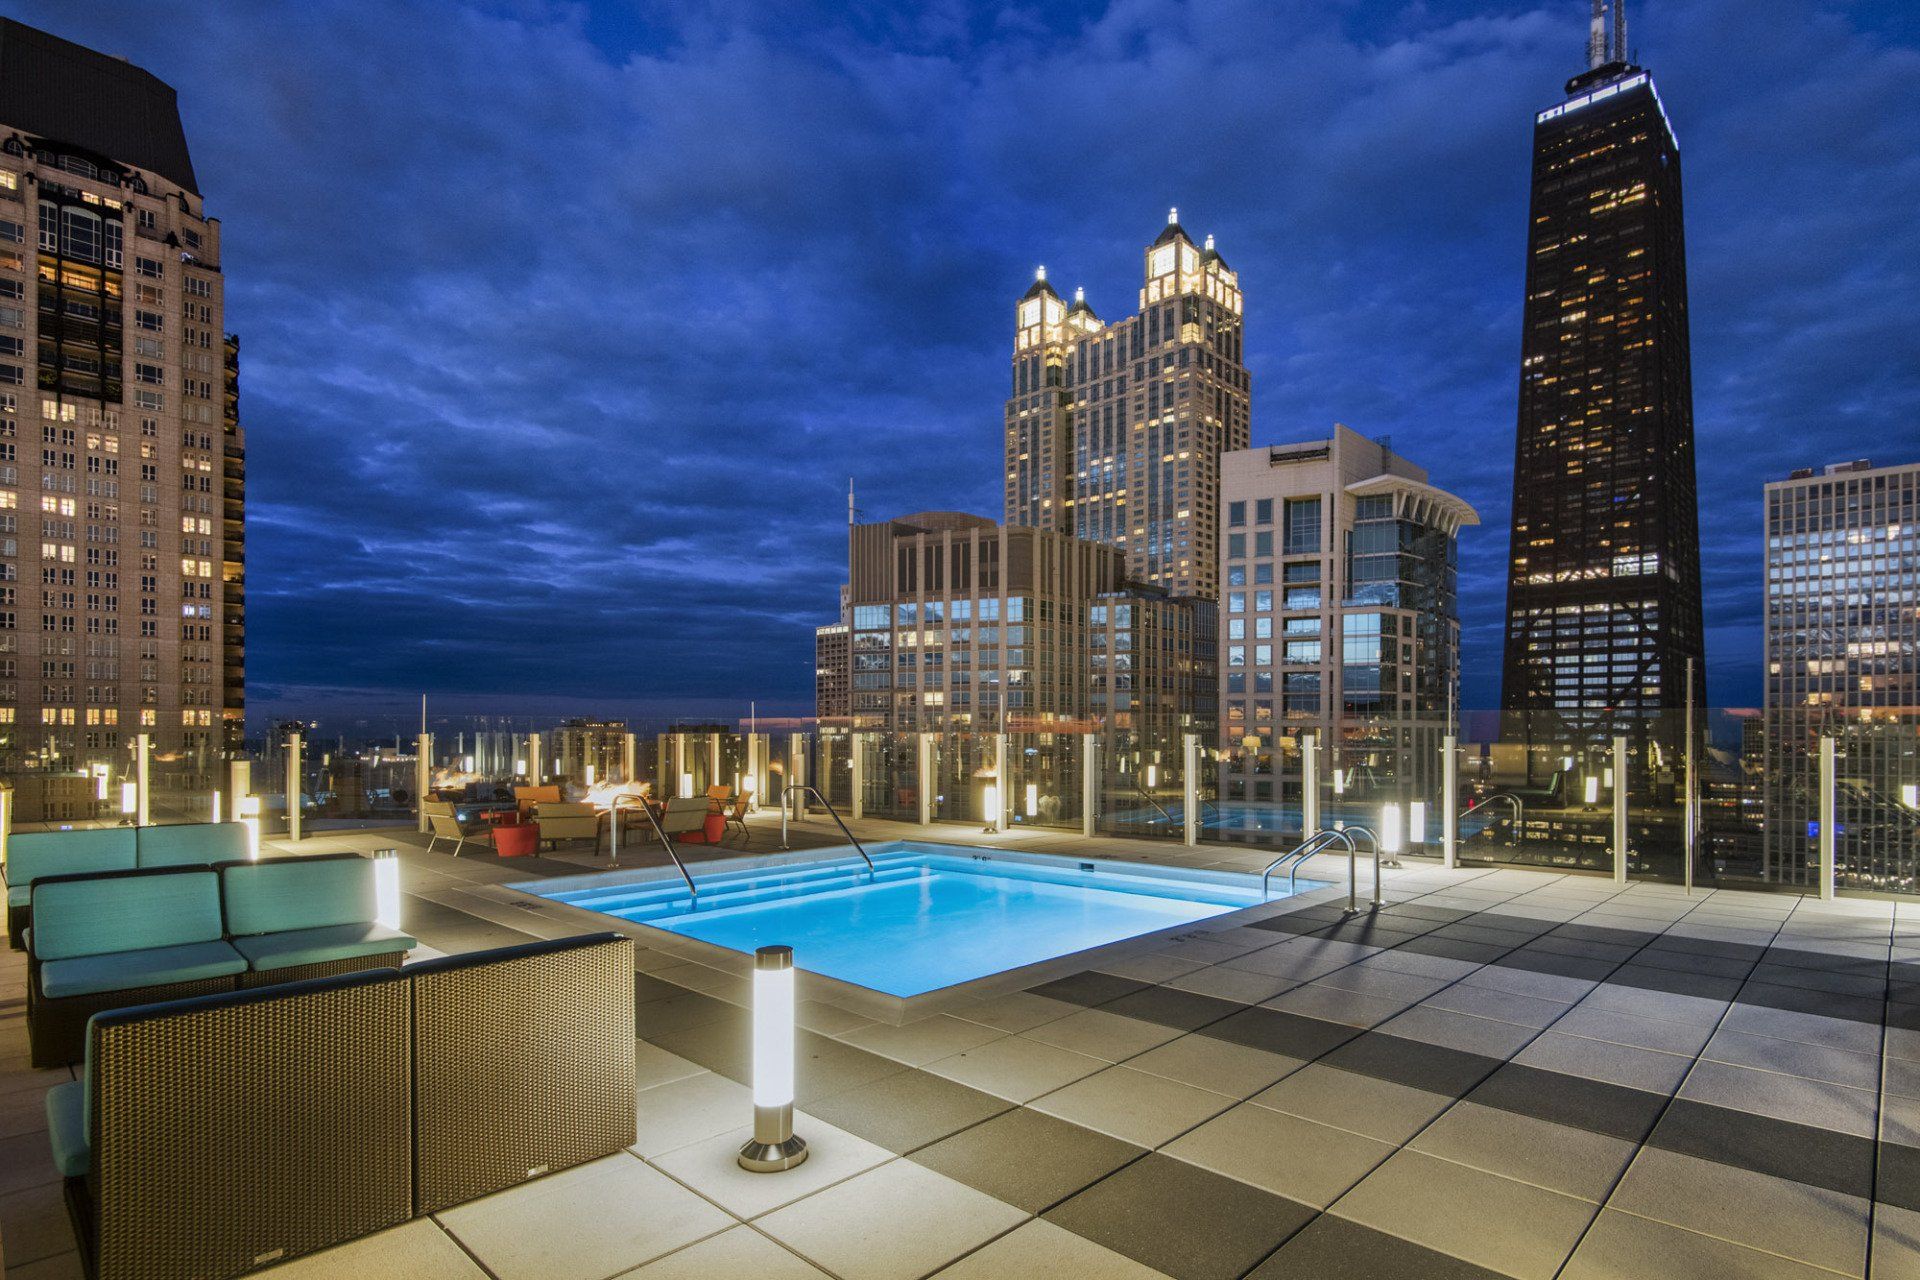 A swimming pool on a rooftop with a city skyline in the background at State & Chestnut.